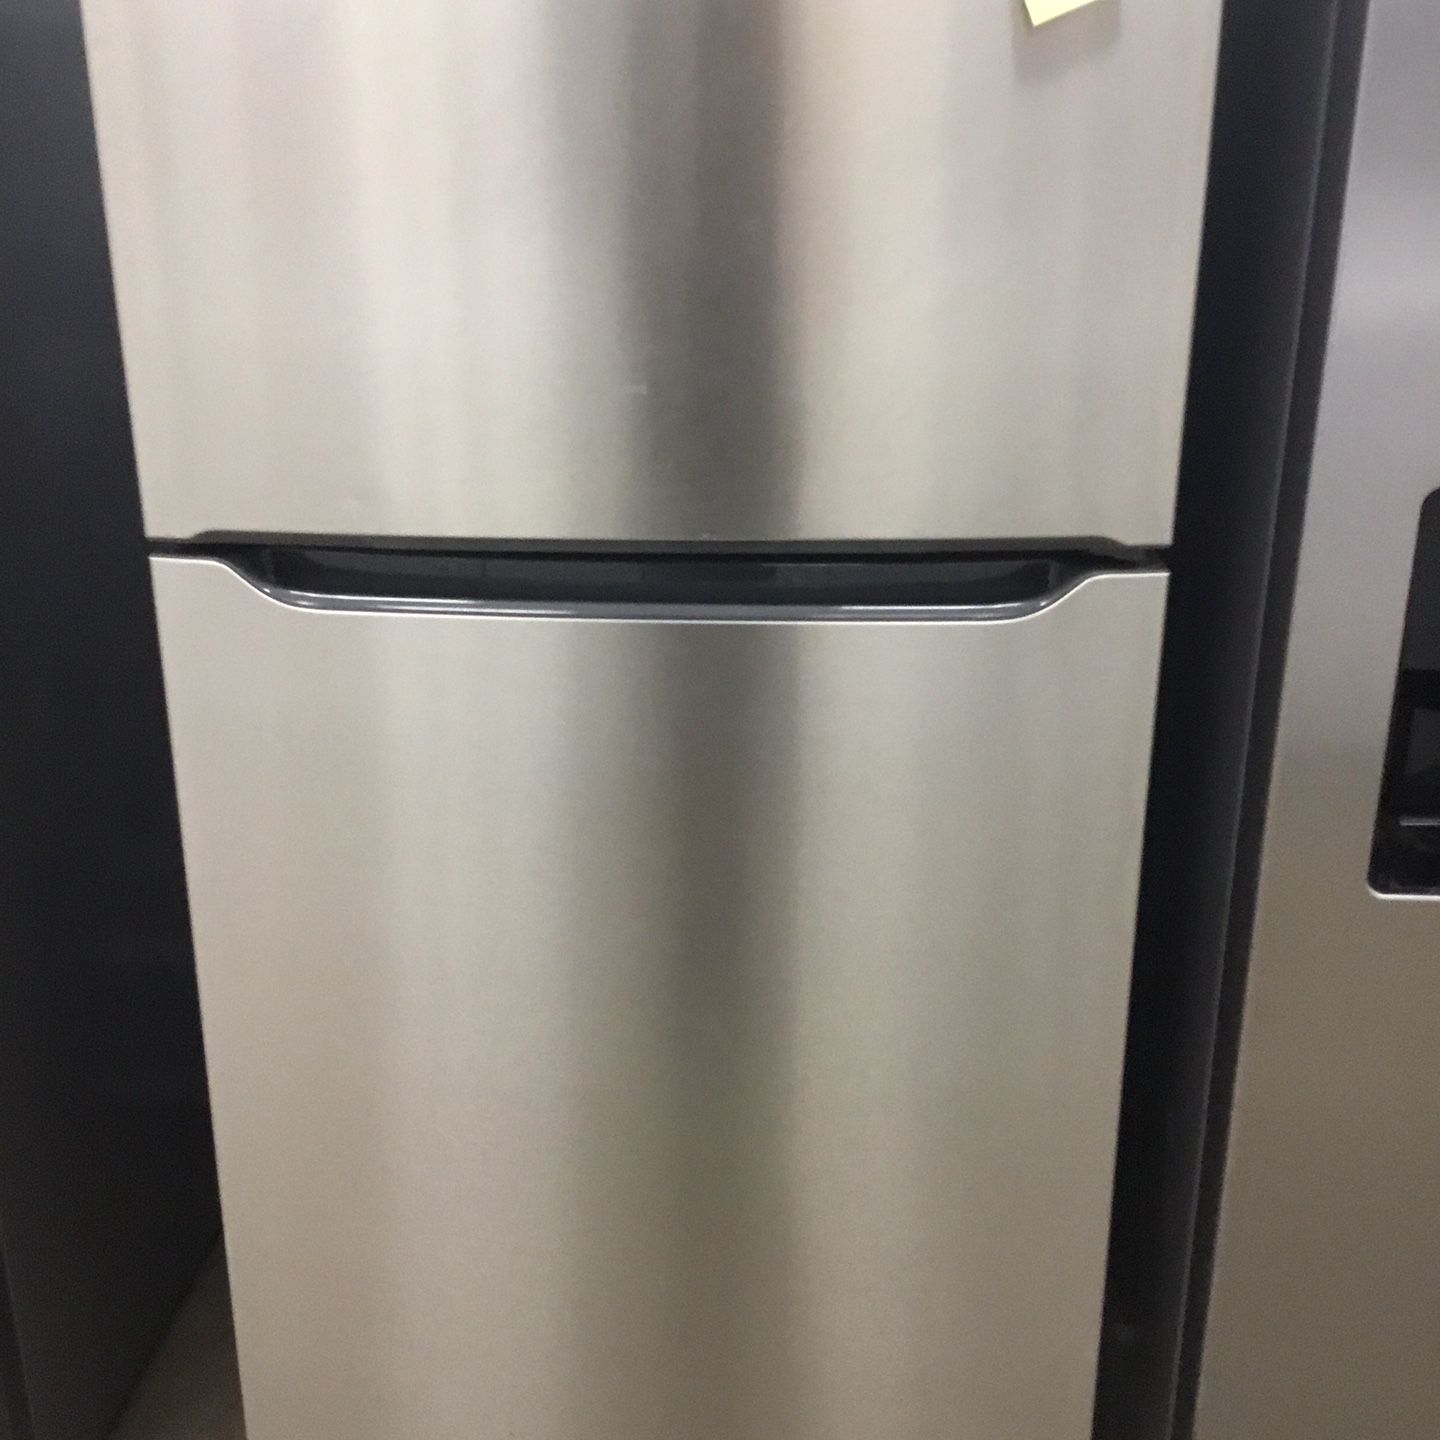 Top And Bottom Refrigerator for Sale in Indianapolis, IN - OfferUp